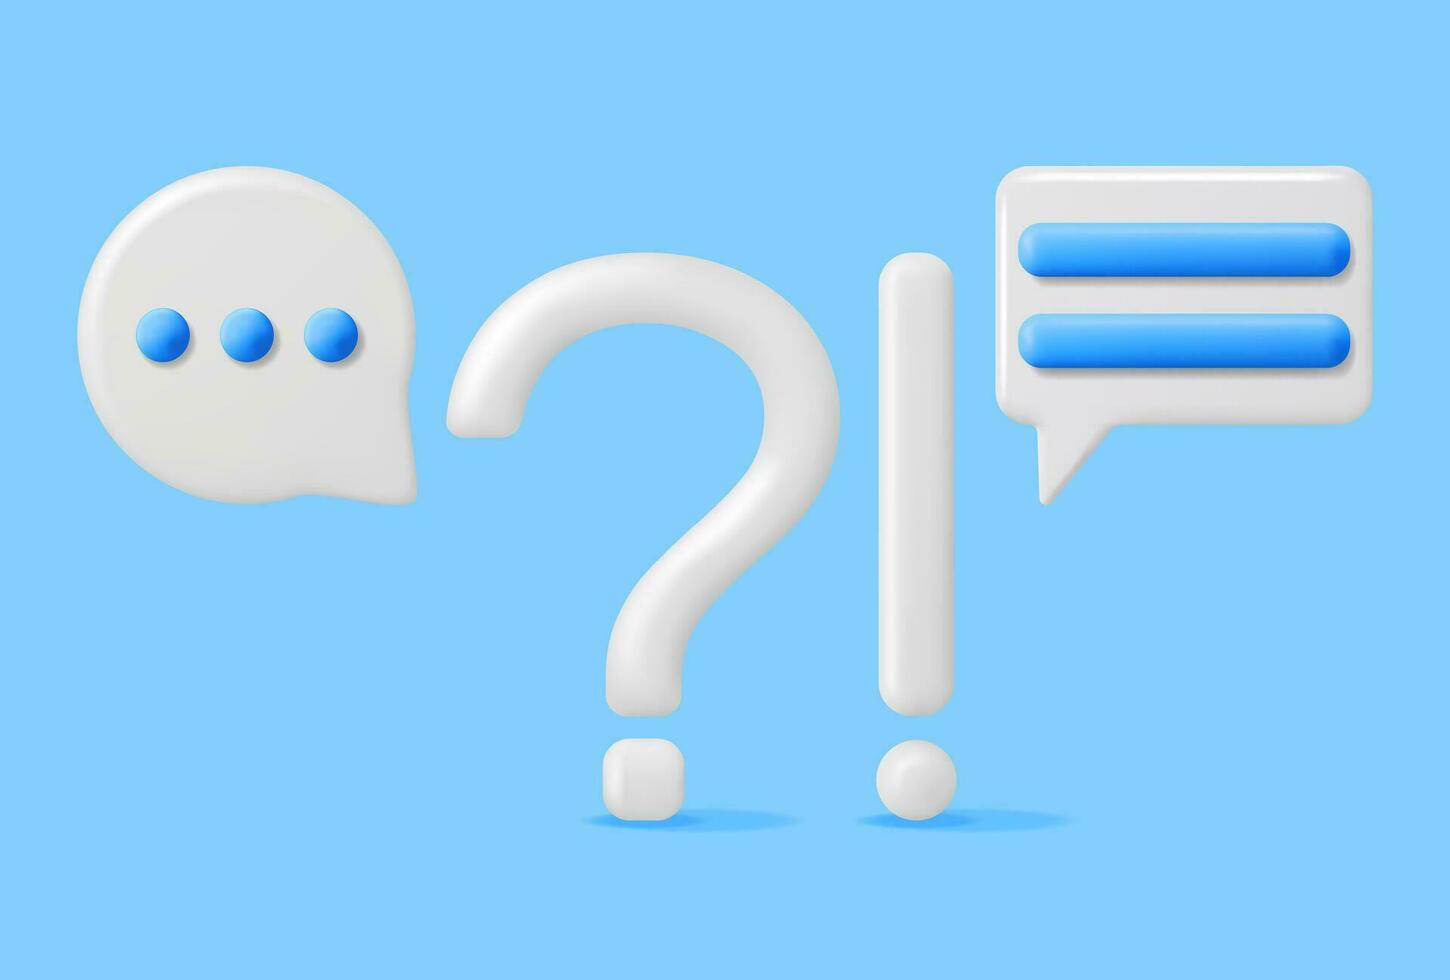 3d Question Exclamation Marks with Chat Bubbles Isolated. Render Questions Exclamations Symbol. Thin Realistic Icon. Concept of FAQ, Support and Help. Problem, Survey, Information. Vector Illustration